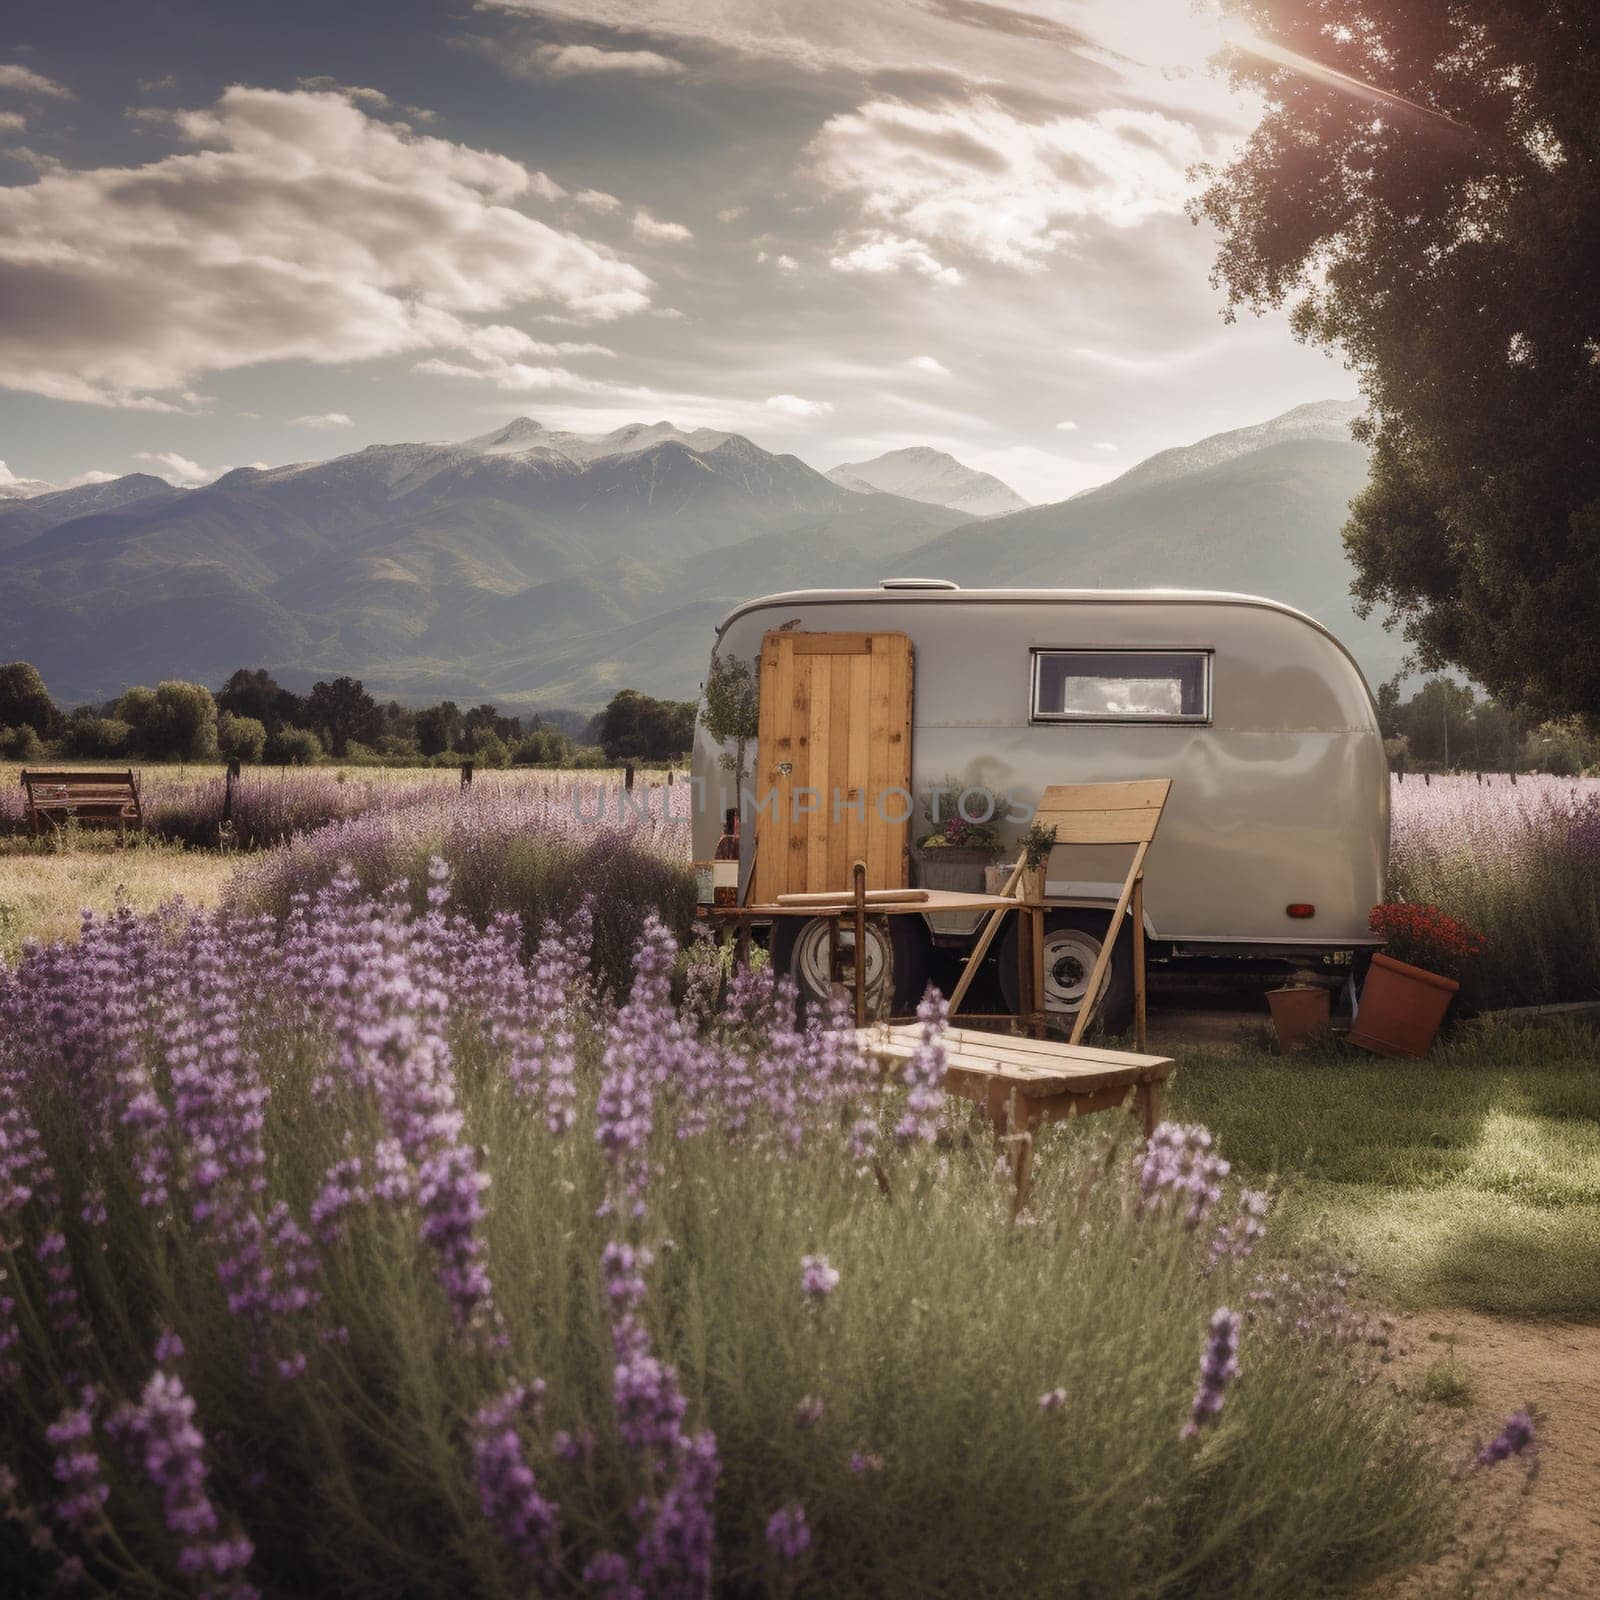 Camper Trailer in the Middle of a Blooming Lavender Field by Sahin